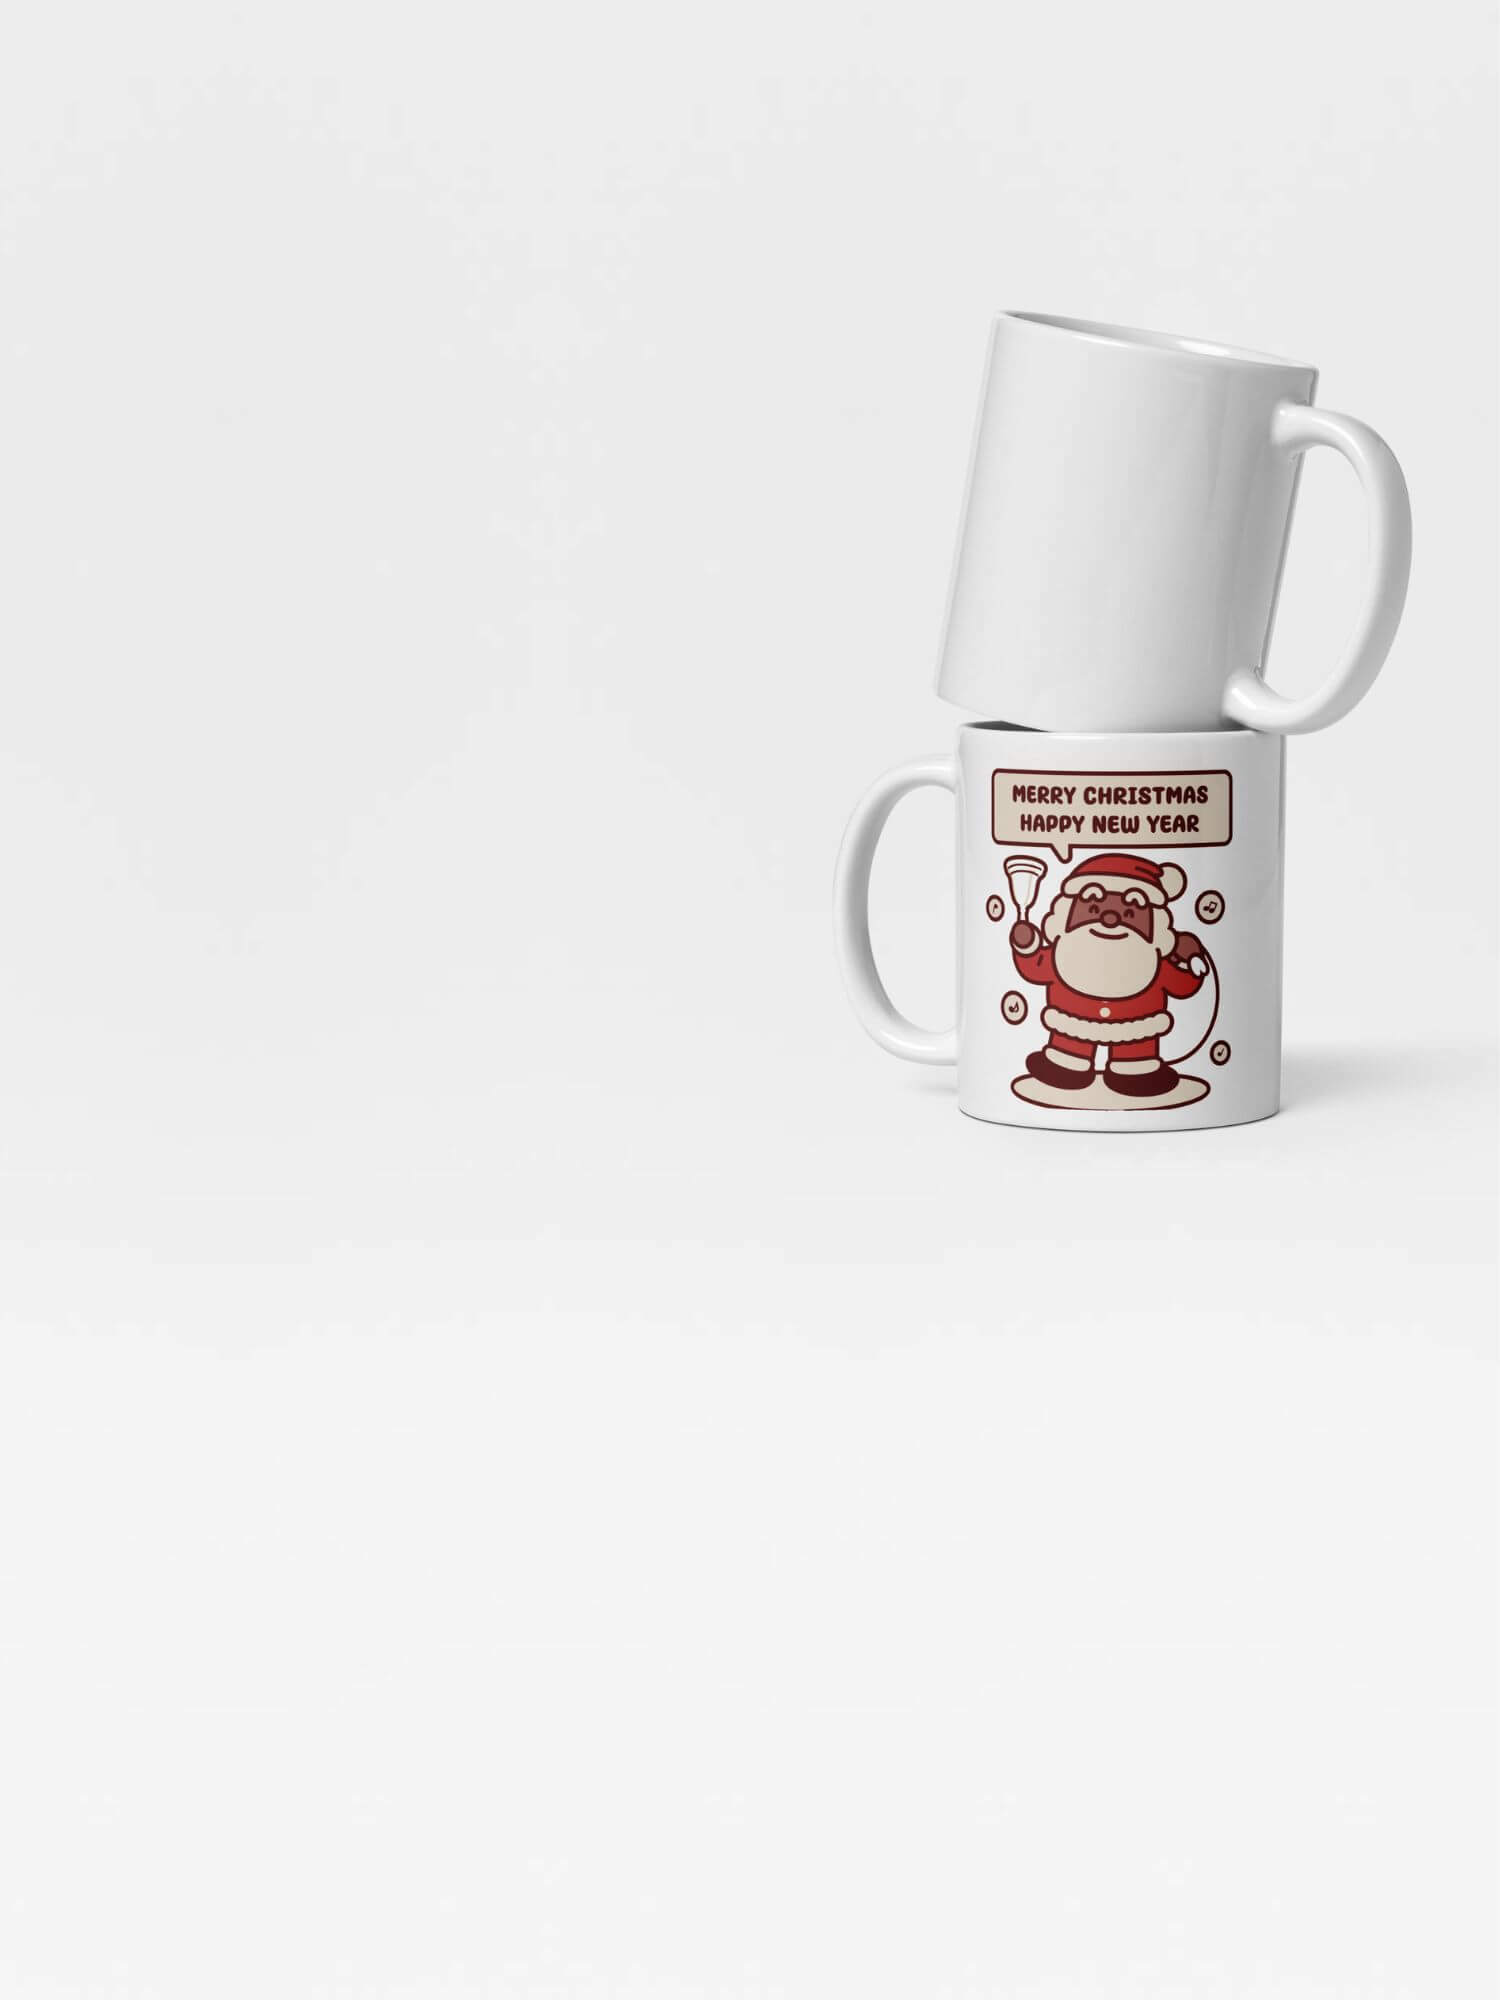 Glossy Seasons Greetings Mug           Cartoon Santa Claus Bell Ringer songs drinks cup coffee, tea, juice, milk drinking cups miteigi branded product item tumblers ceramics in white with black brown Father Christmas charitable street collector multicolor pattern Ceramic Anime Gifts Mery Christmas Happy New Year charity musical singer holiday season festive mugs